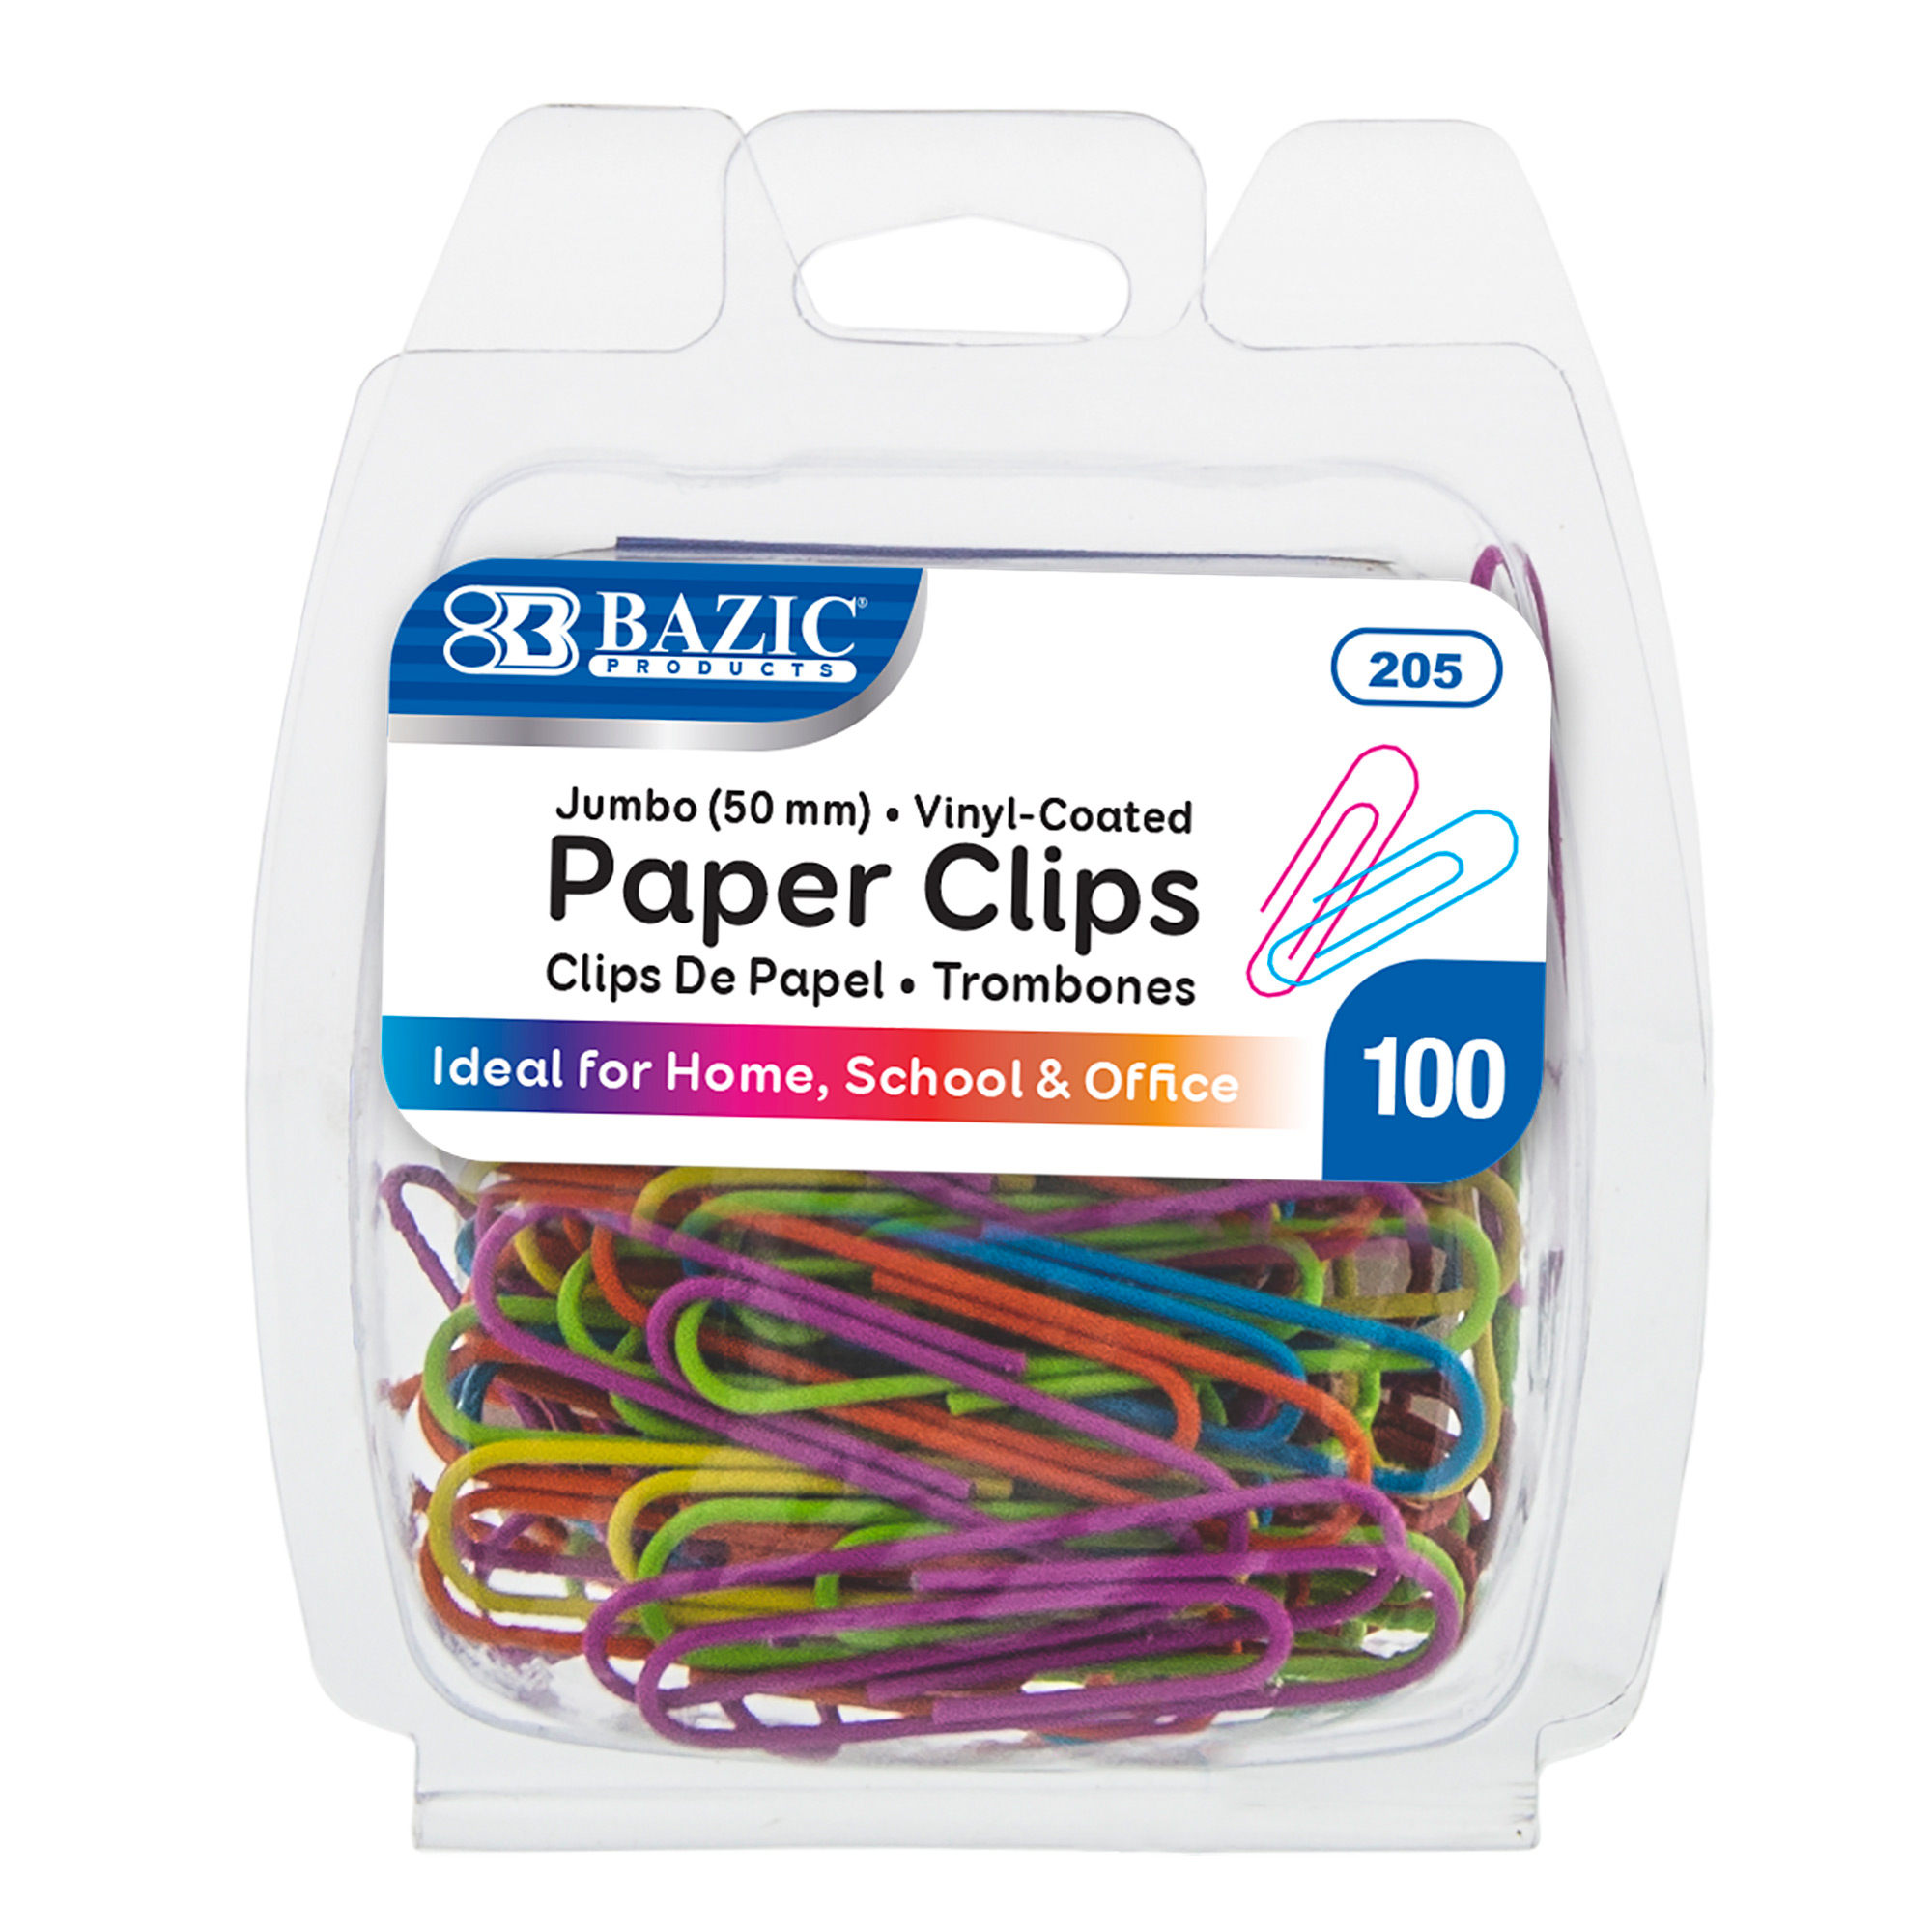 Vannise Paper Clips Sturdy and Rust-Resistant 100PCS 2 Large Paper Clips 50MM Green Jumbo Paper Clips Great for School Bright Vinyl Coated Paper Clips Home and Office 